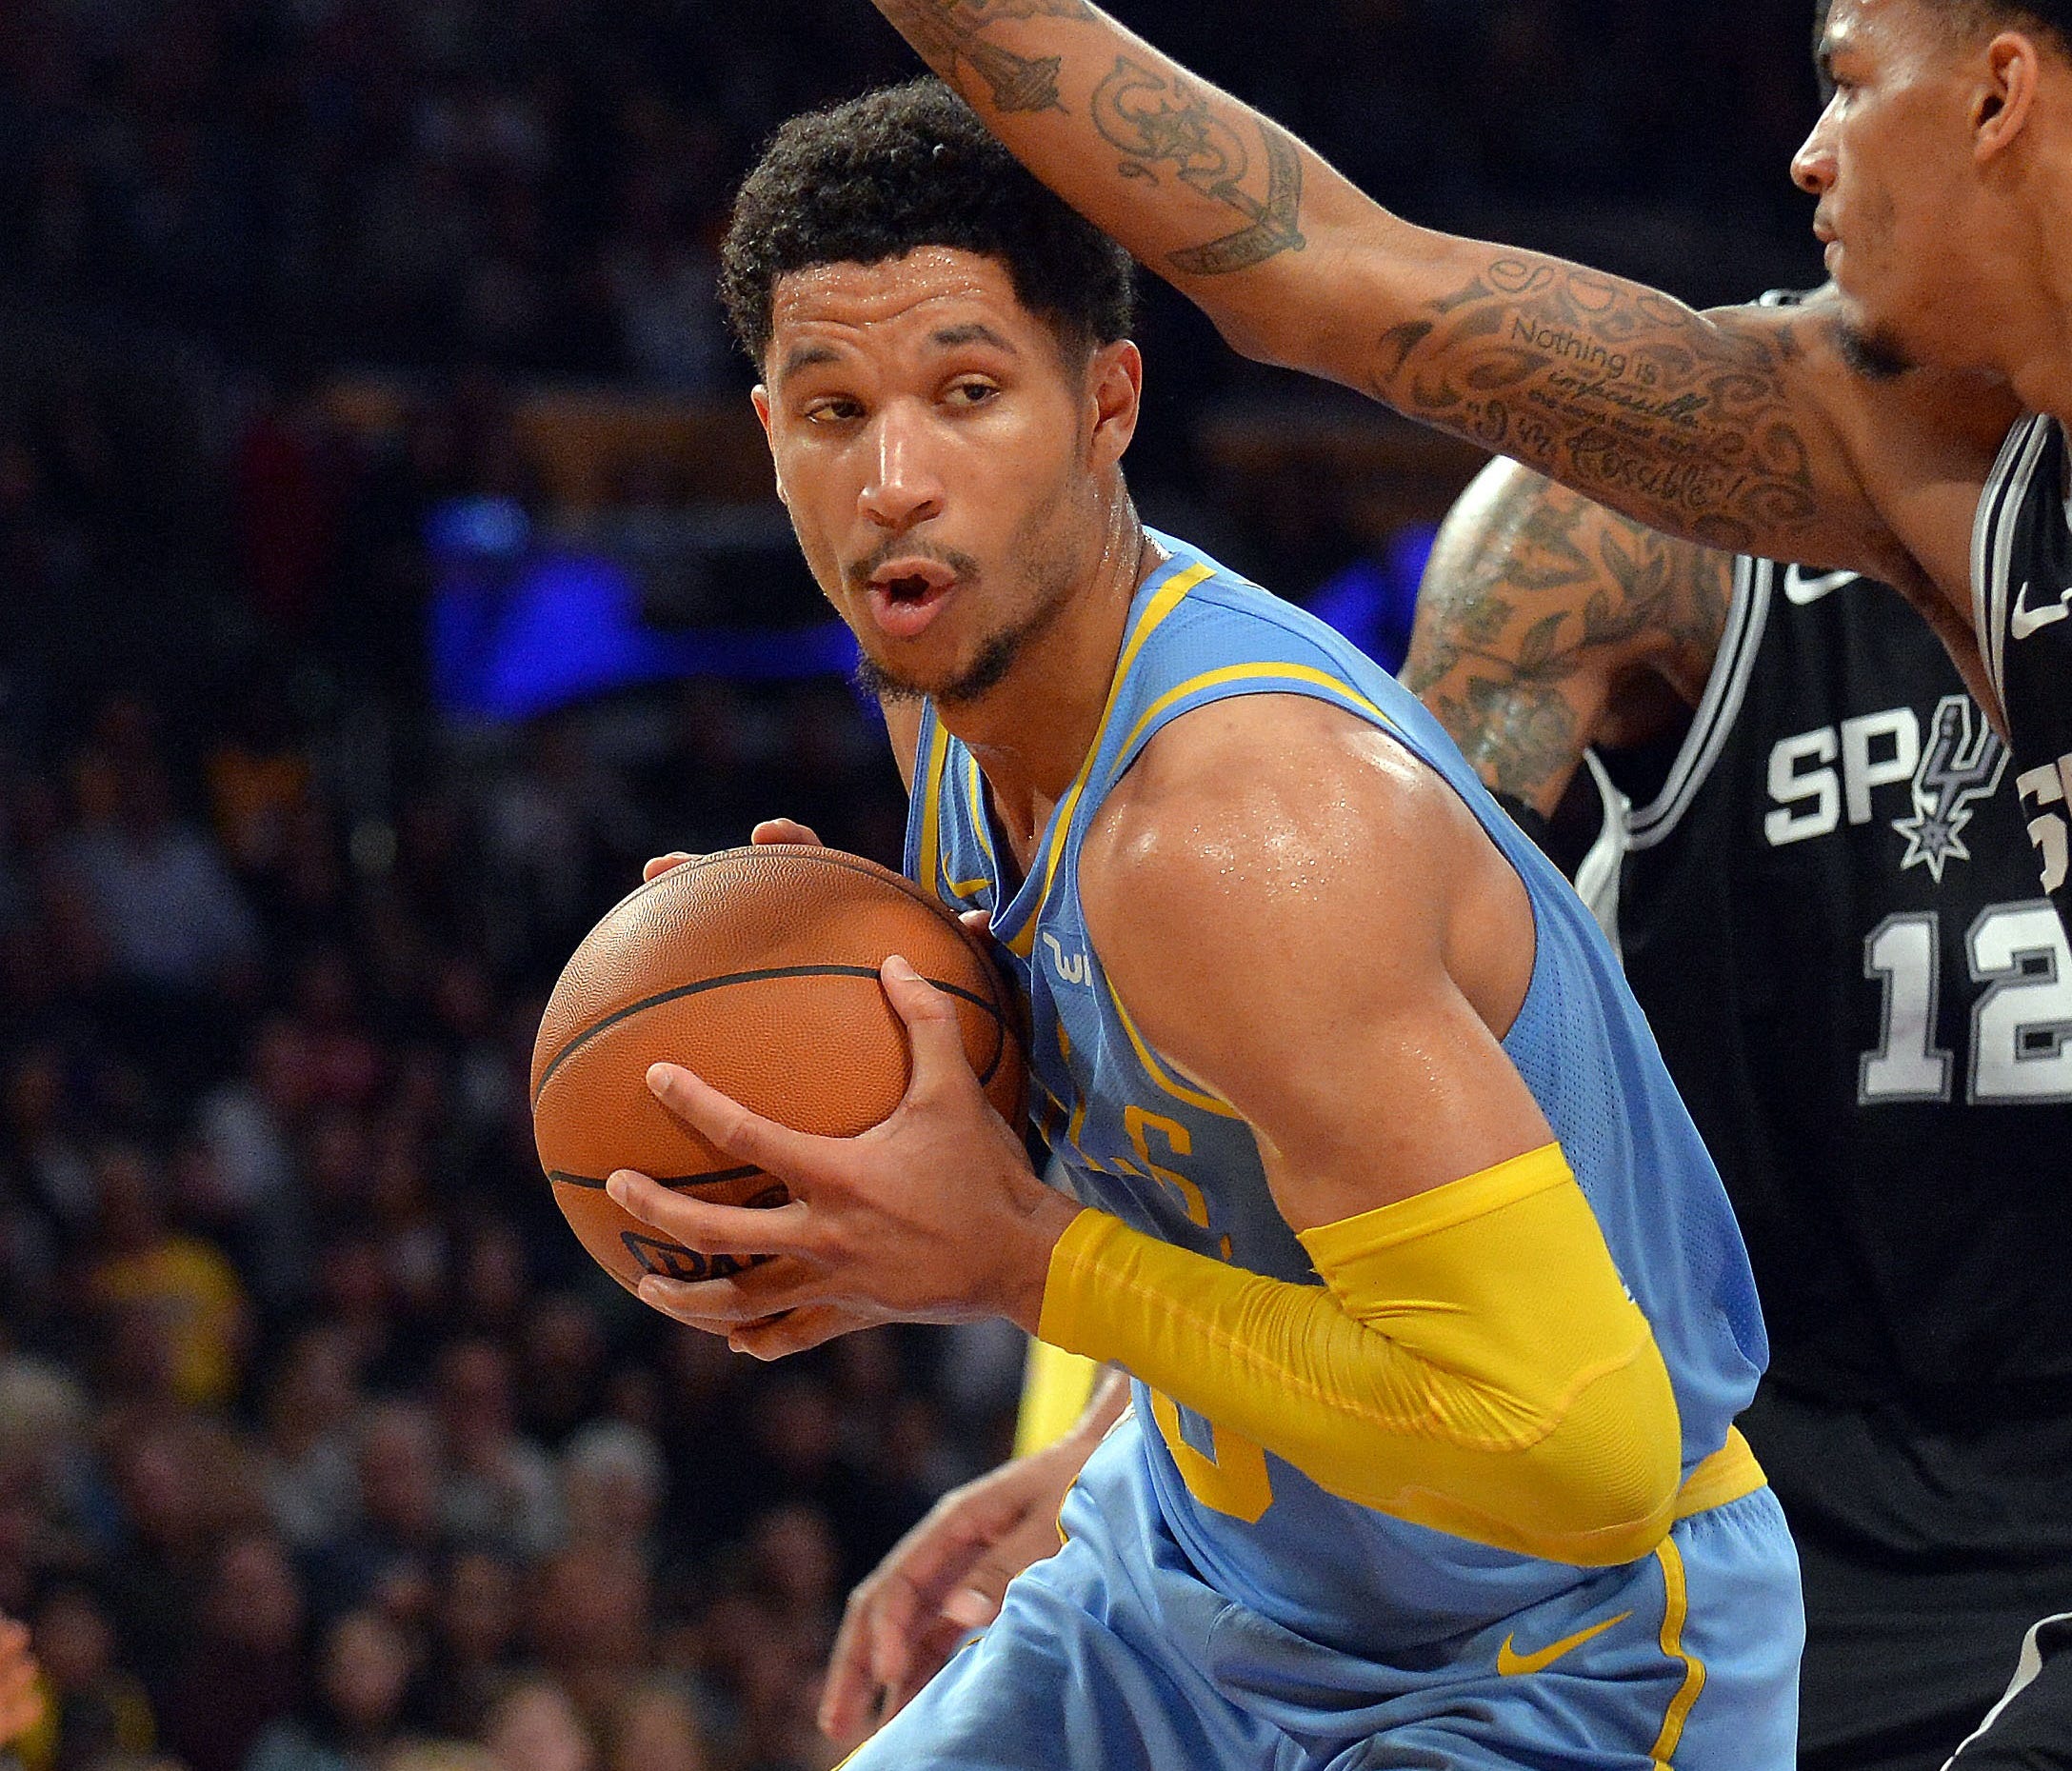 Josh Hart missed at the end of regulation, but the Lakers prevailed in overtime.